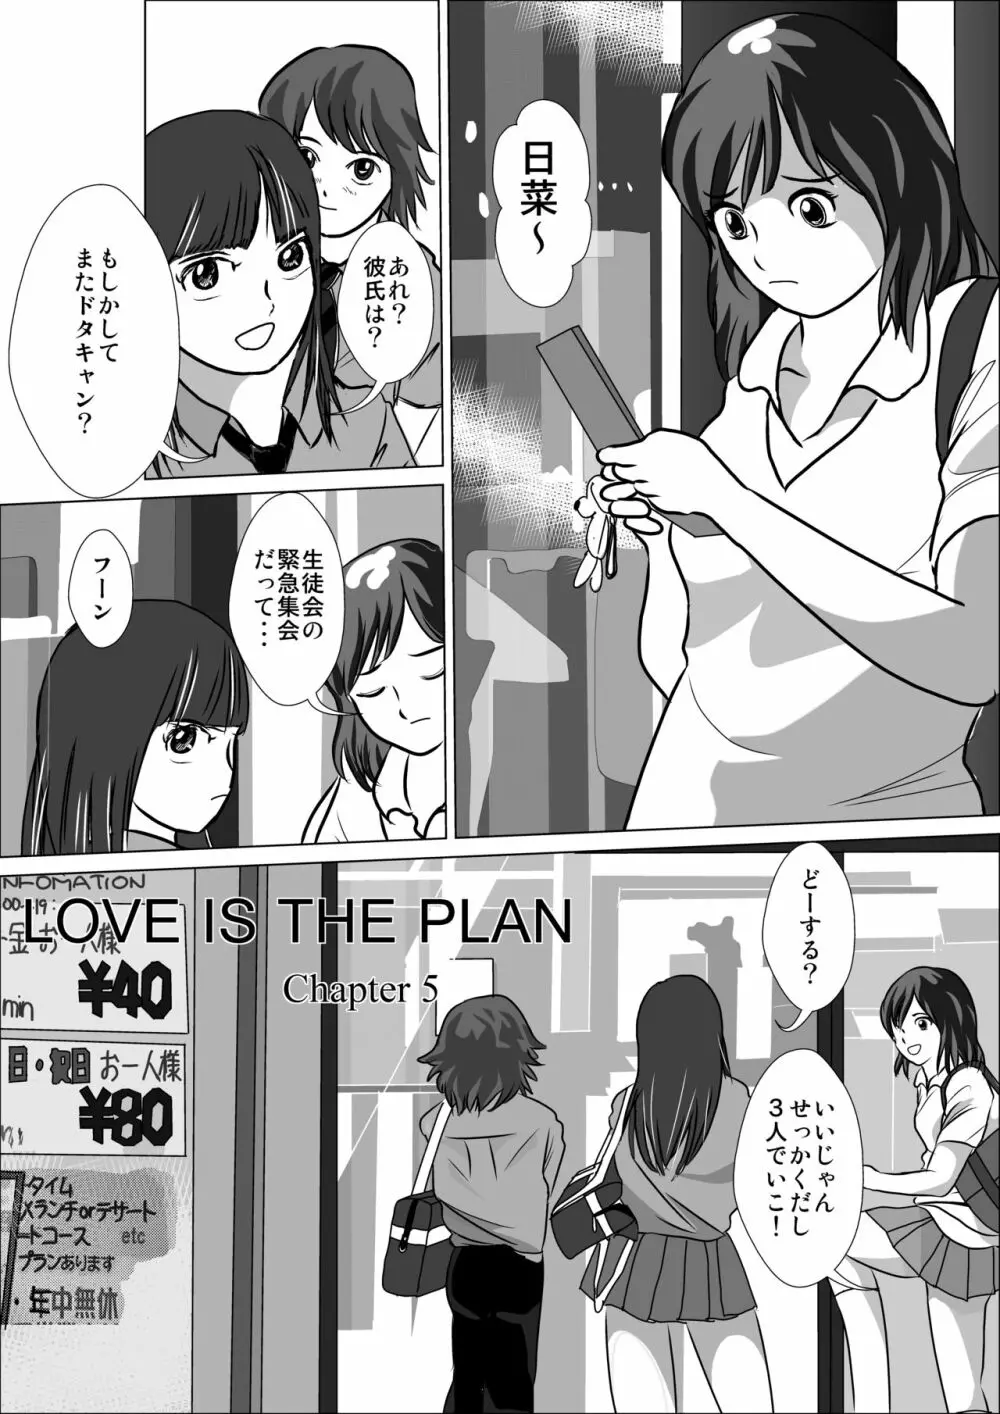 LOVE IS THE PLAN Chapter 5 11ページ